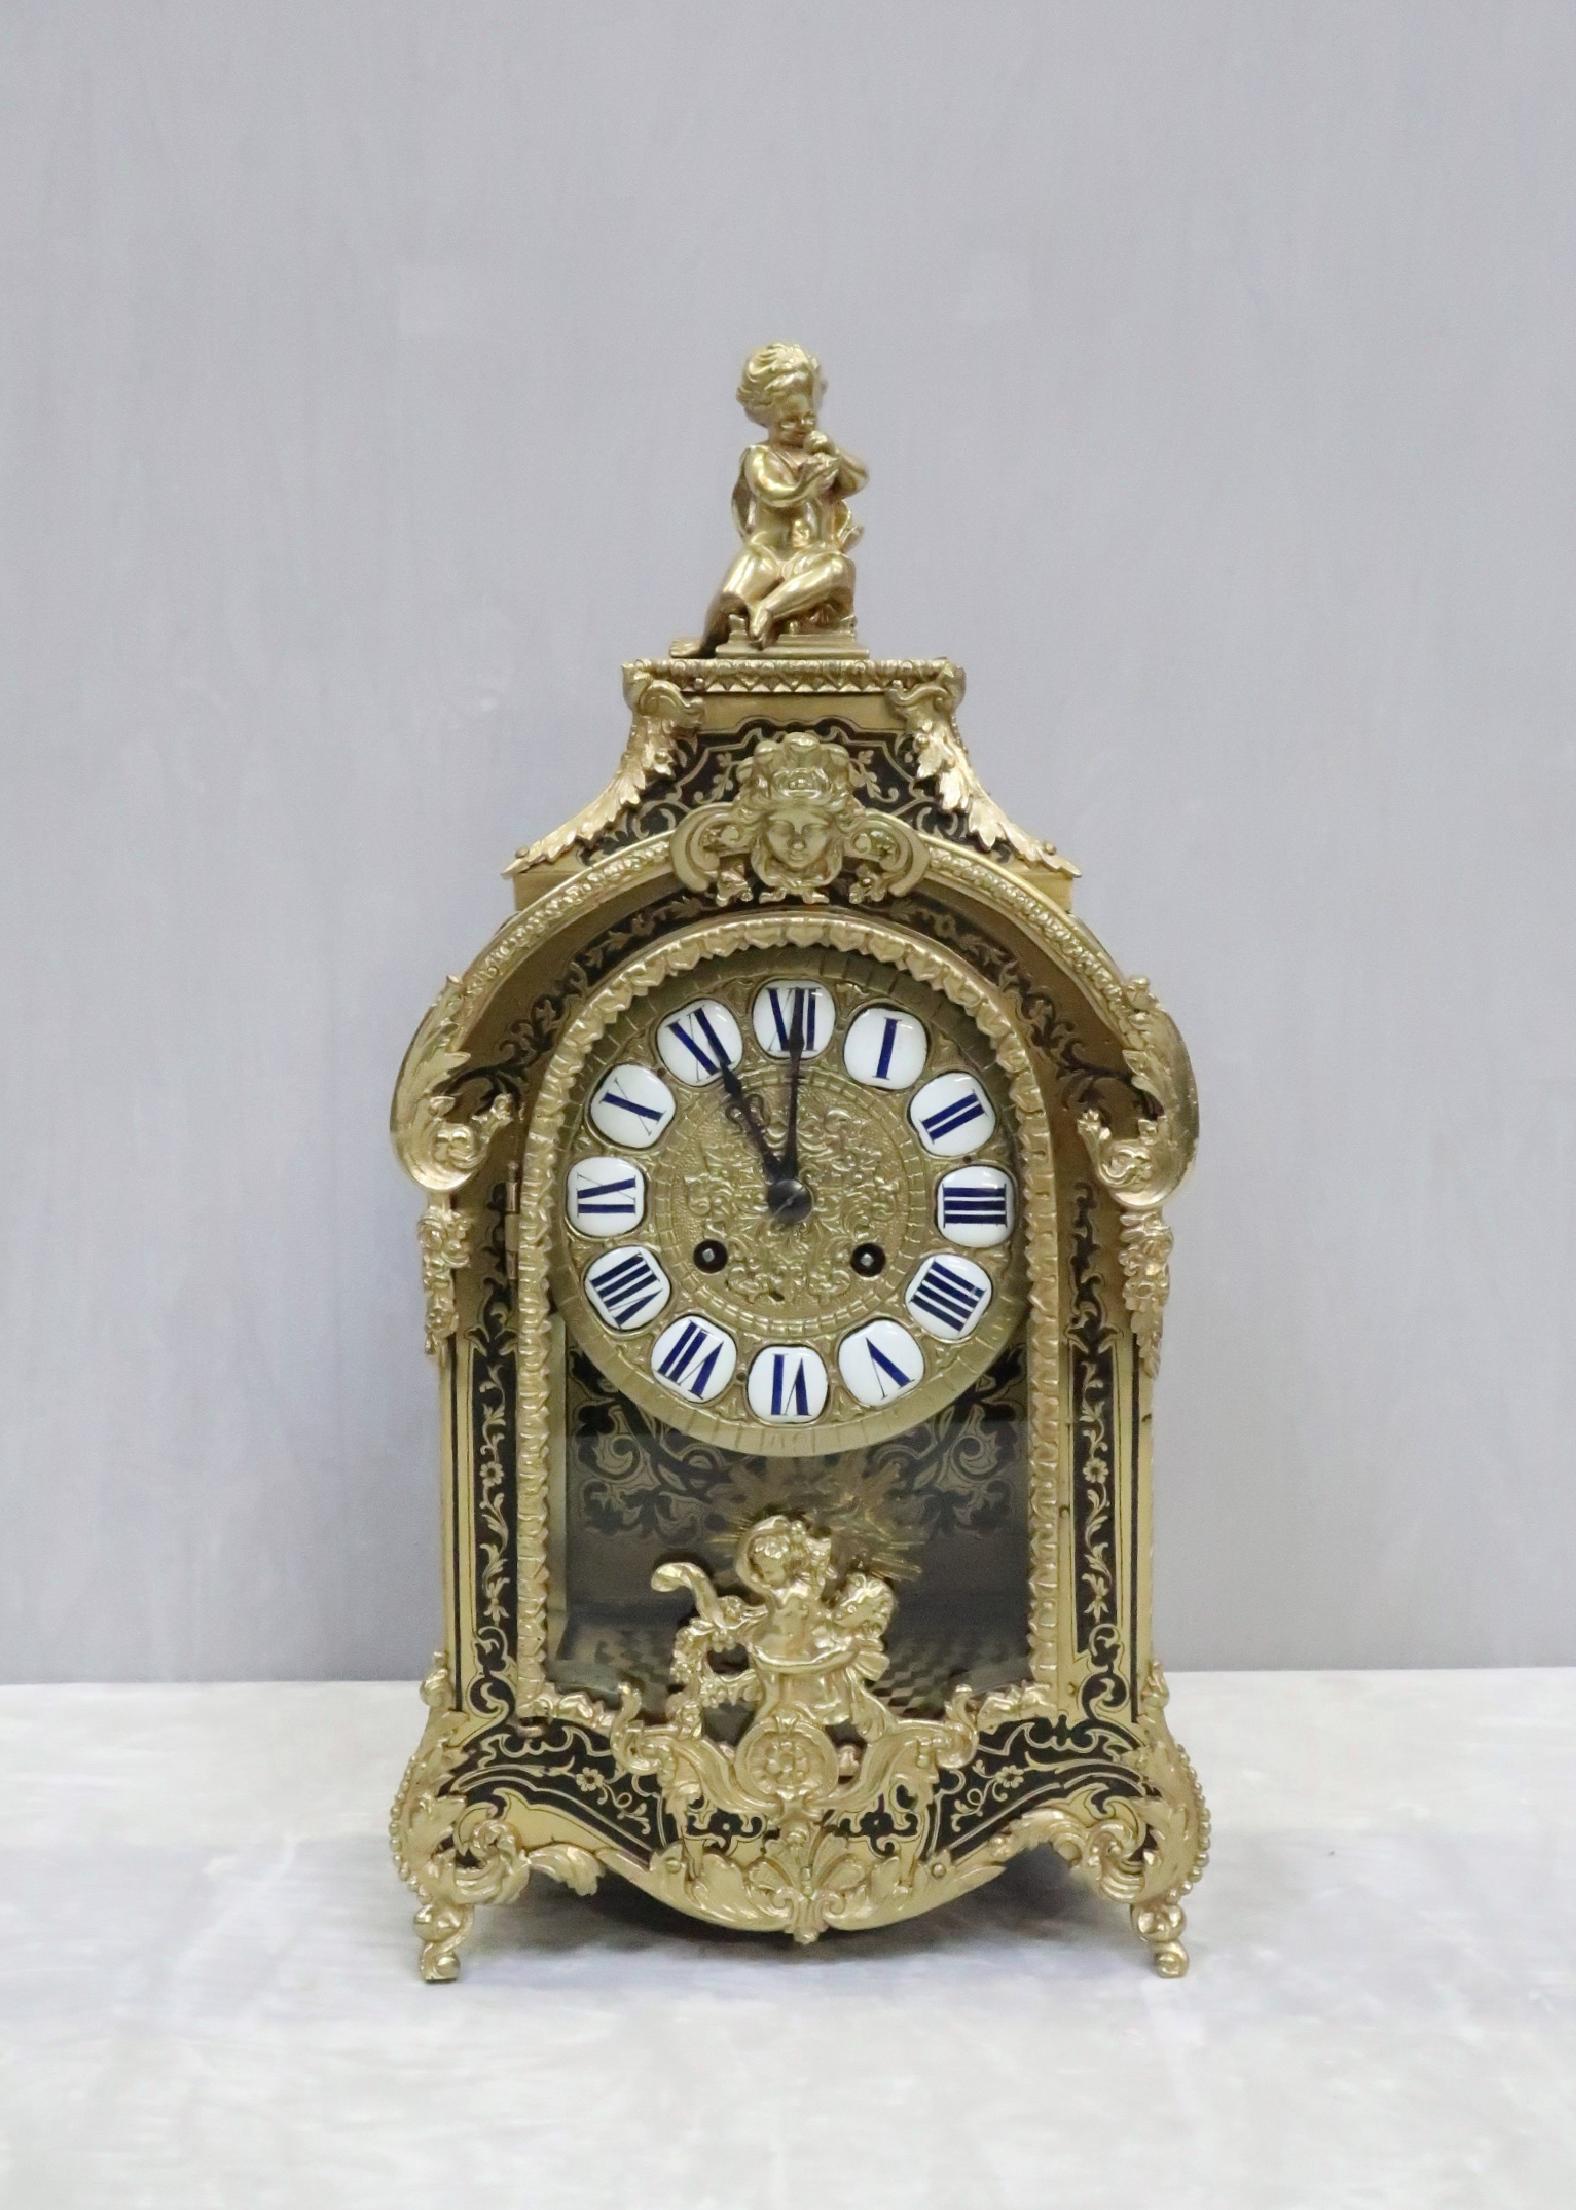 An extremely good quality Louis XIV style French boulle natural colored tortoise shell and brass inlaid mantel clock with side and front viewing windows showing the clocks decorative inlaid back door and floor. The clock has good quality ormolu